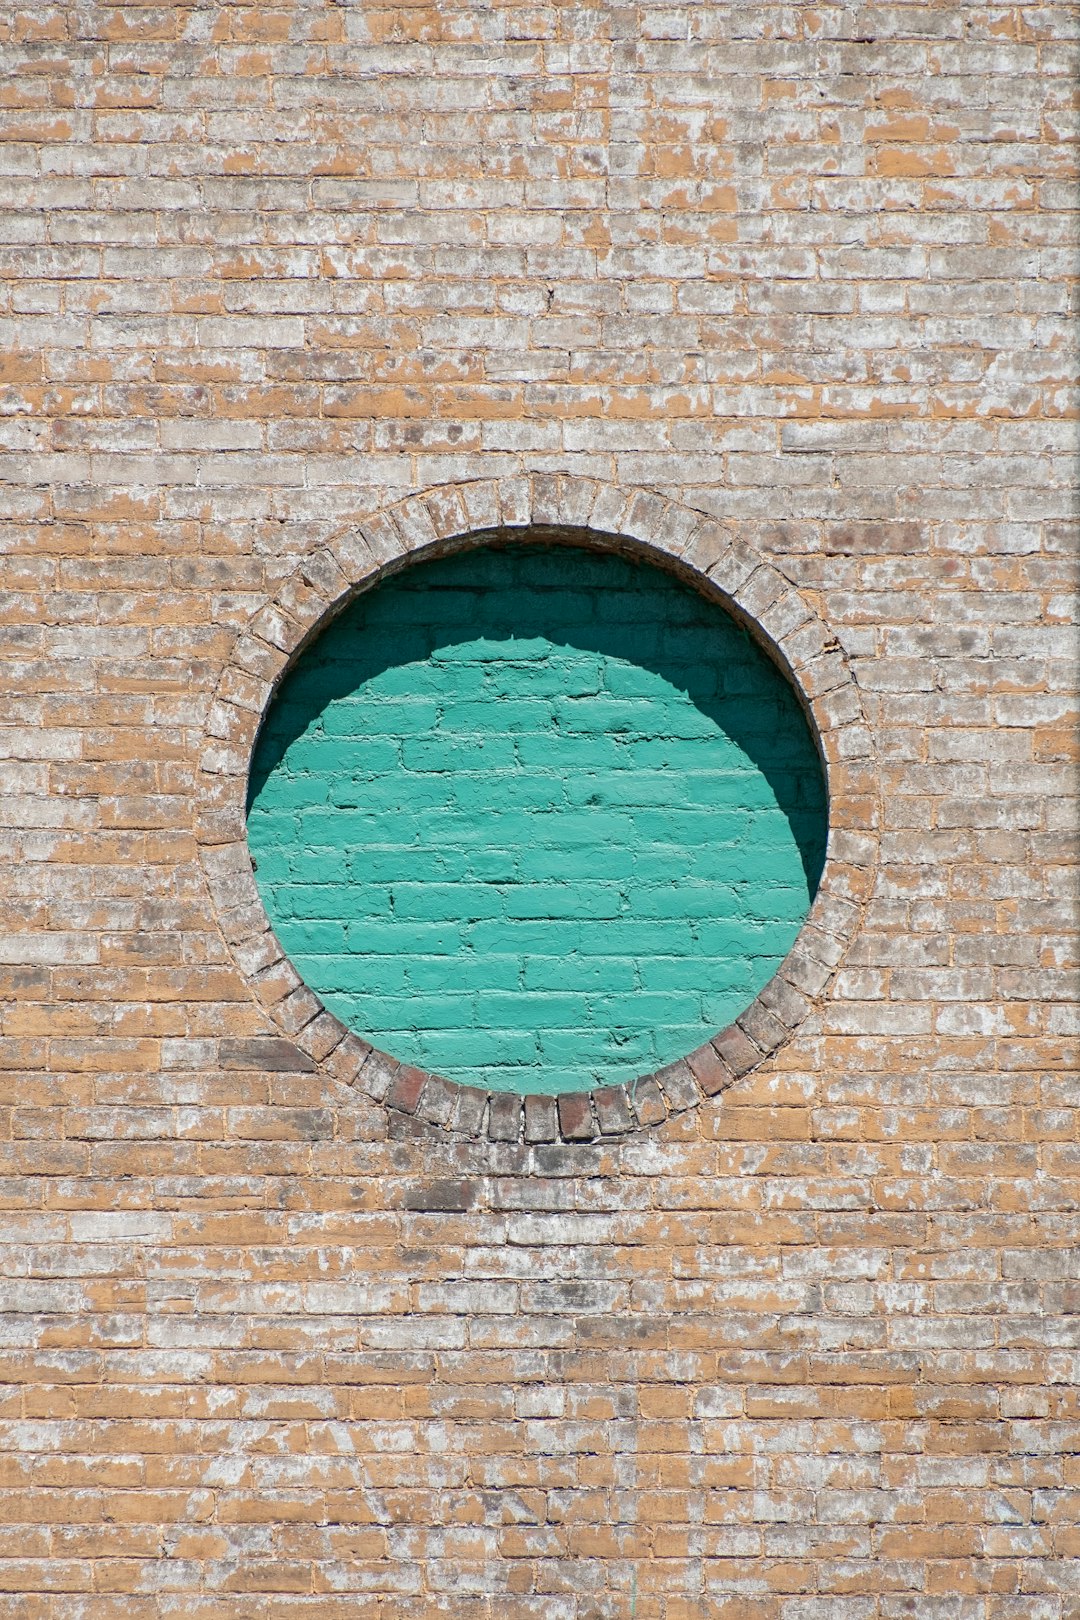 brown brick wall with blue round glass window